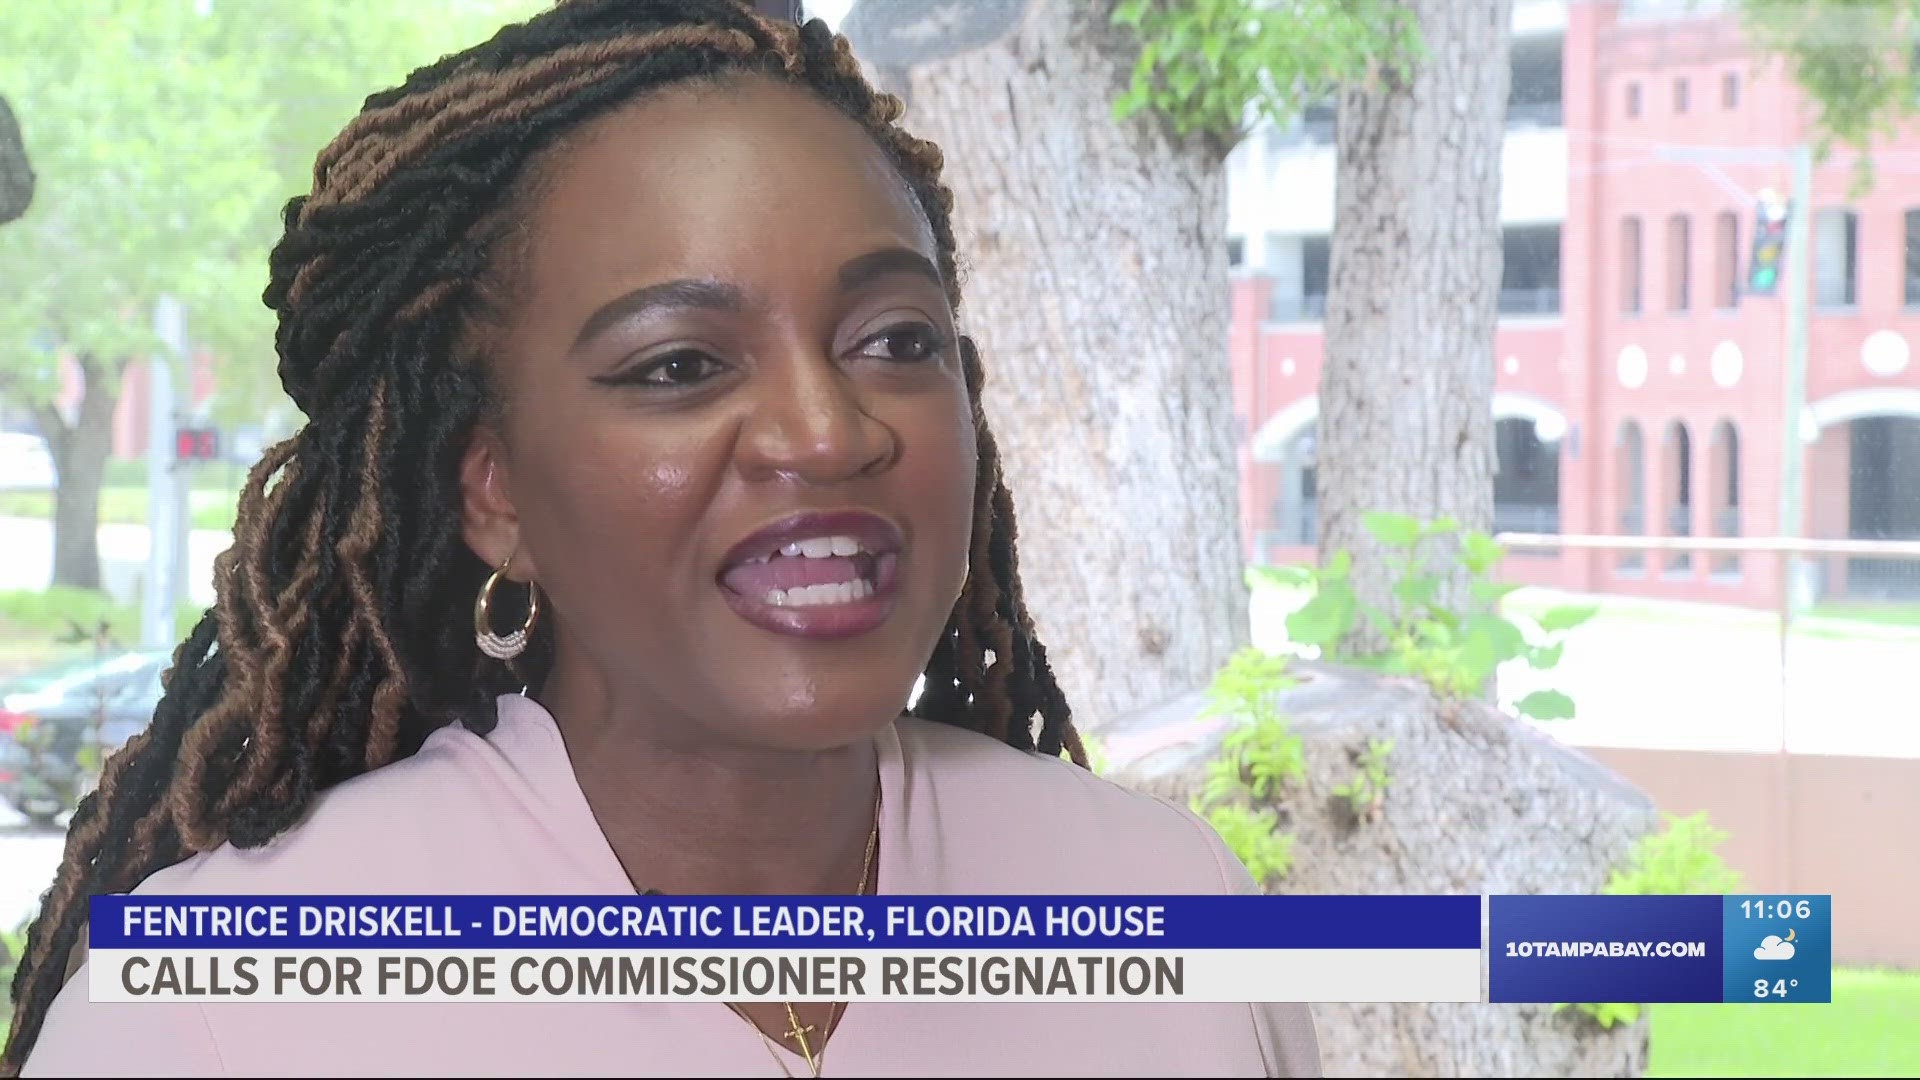 Representative Fentrice Driskell (D-Tampa) is calling for accountability over the state's new education standards, which imply some slaves benefitted from slavery.